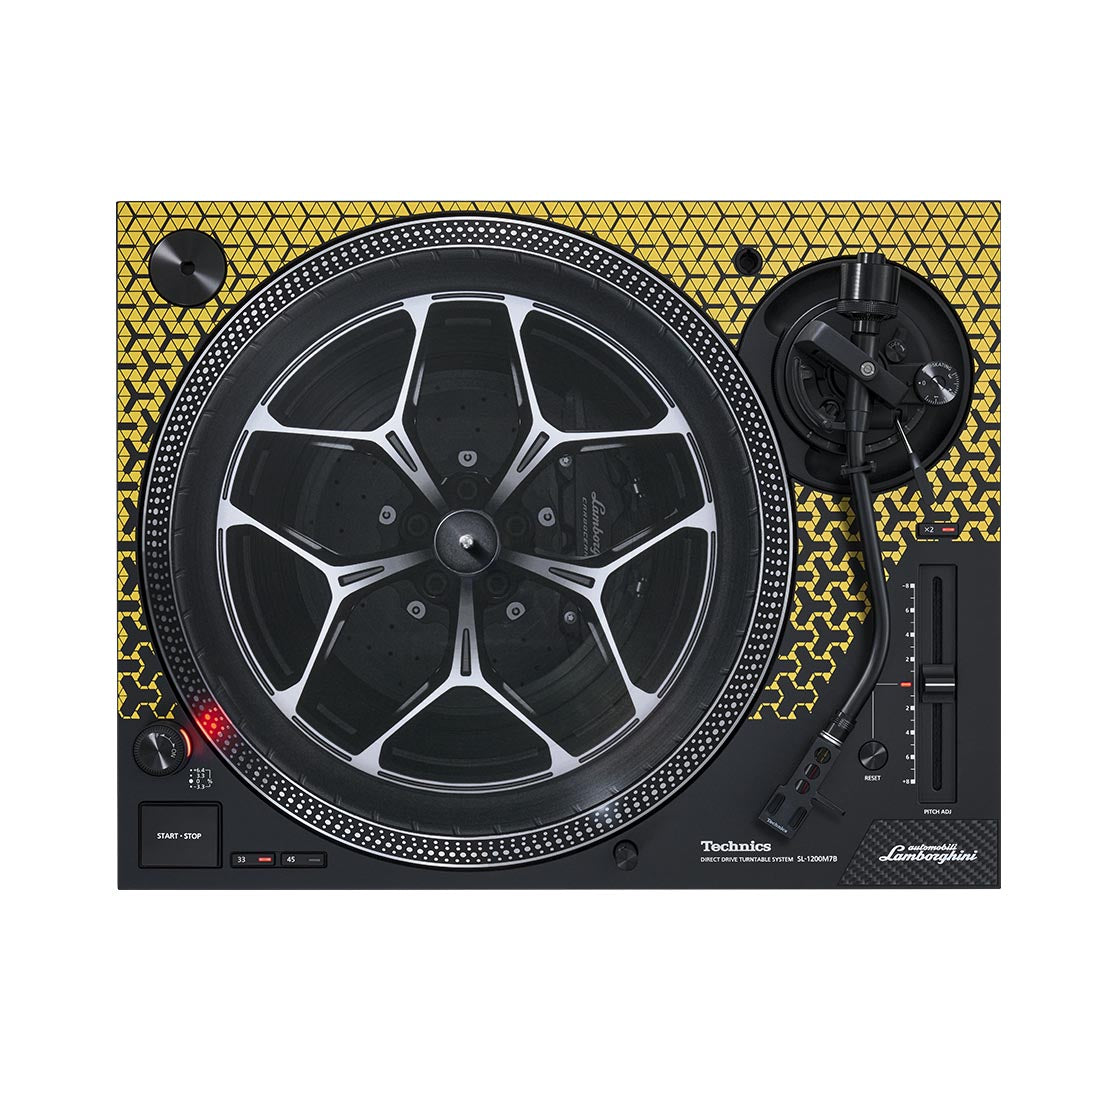 Technics SL-SL1200M7BY Yellow Lamborghini Collaboration Turntable with engine sounds picture vinyl